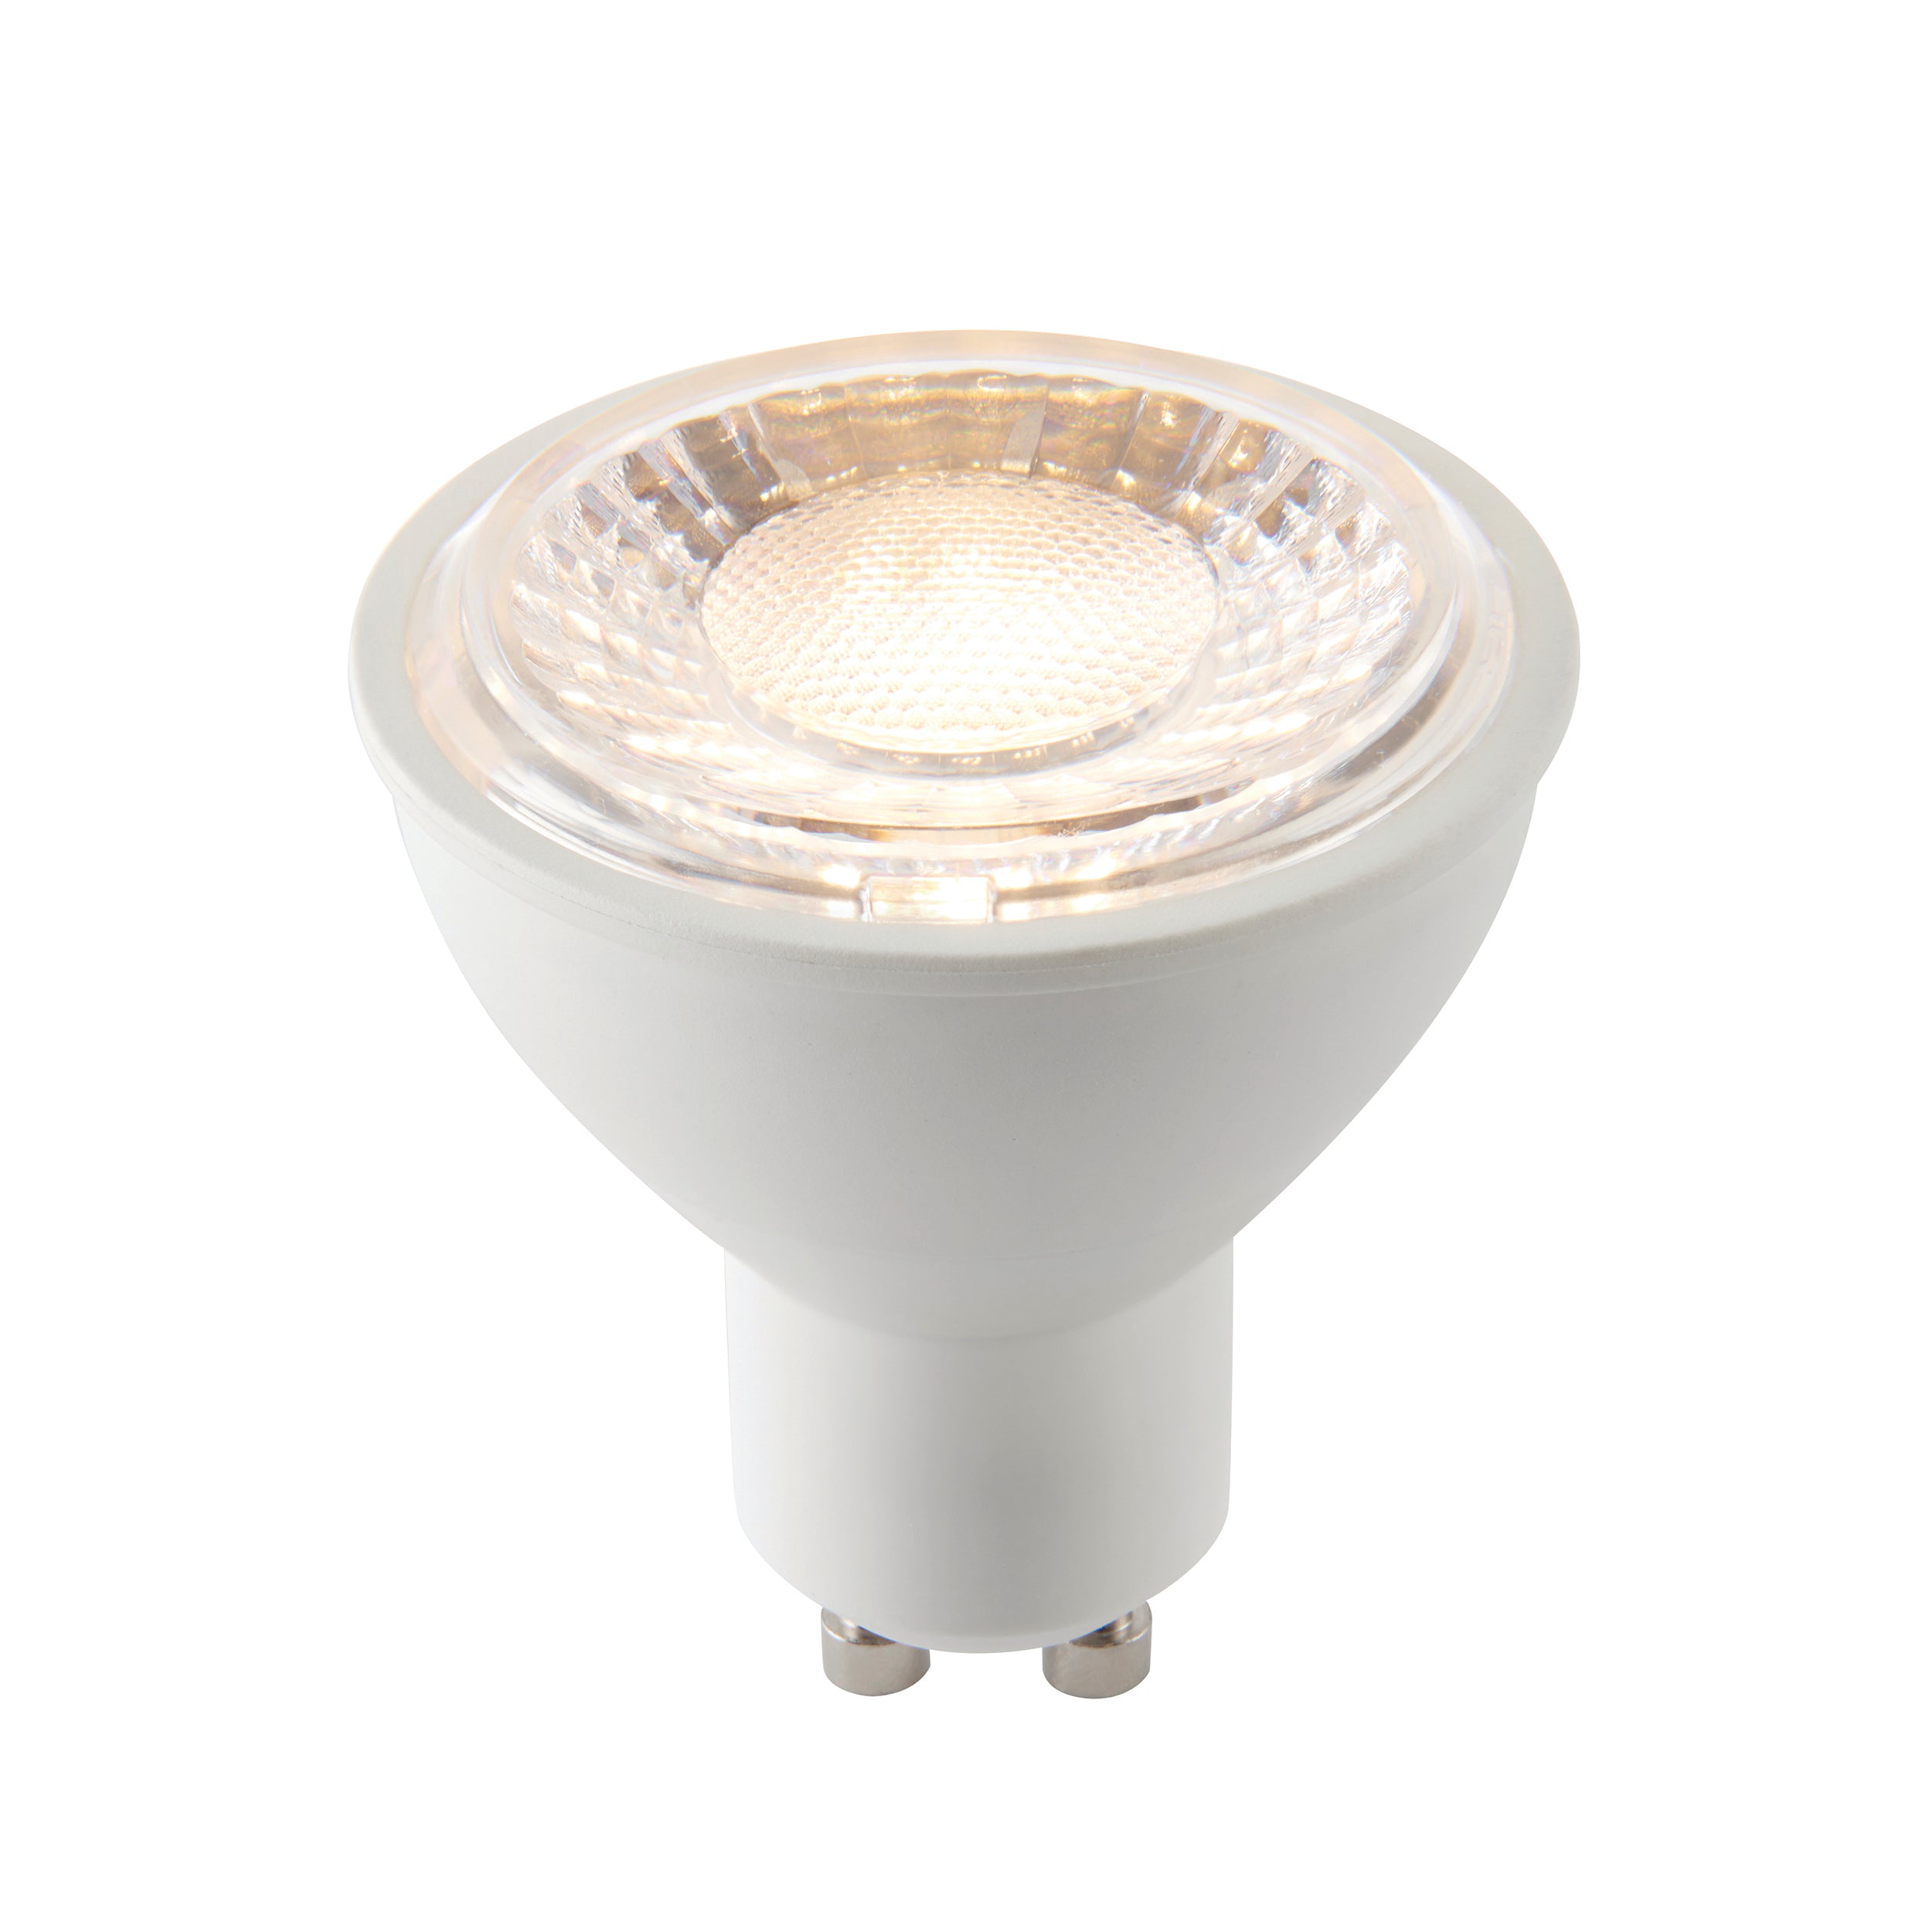 Saxby Lighting GU10 LED SMD dimmable 60 degrees 7W 70259